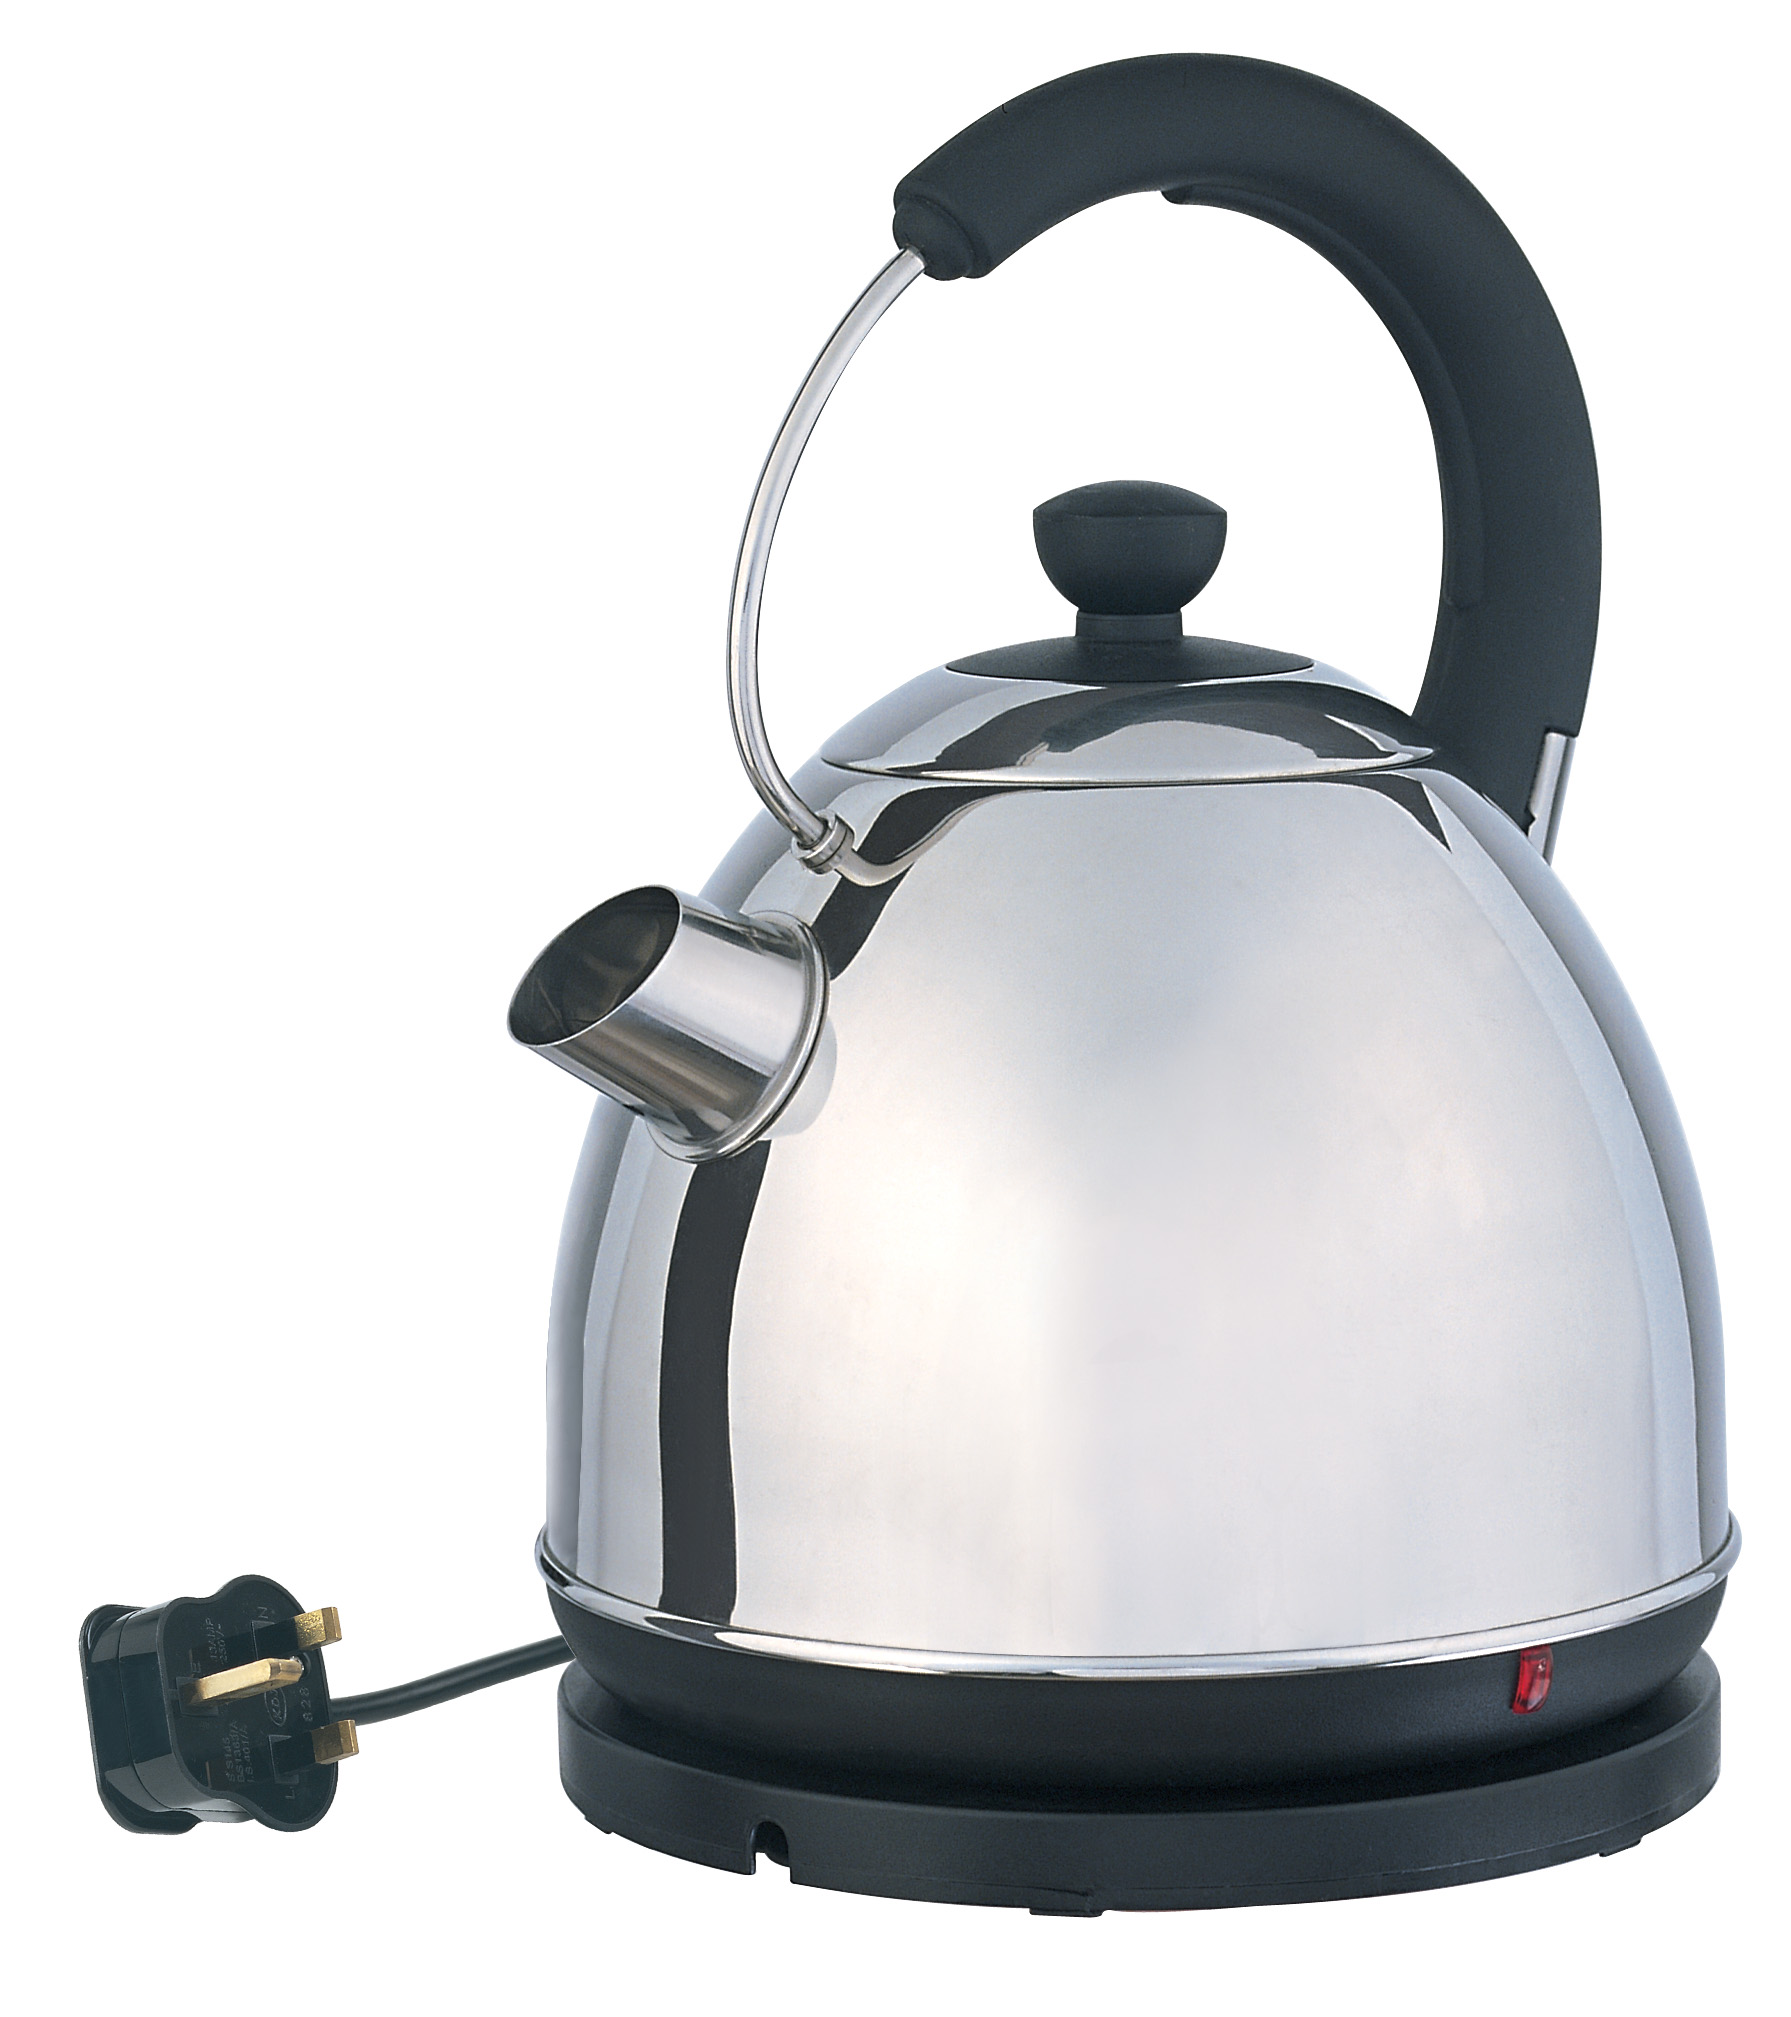 Stainless steel electric kettle with Automatic cut-out